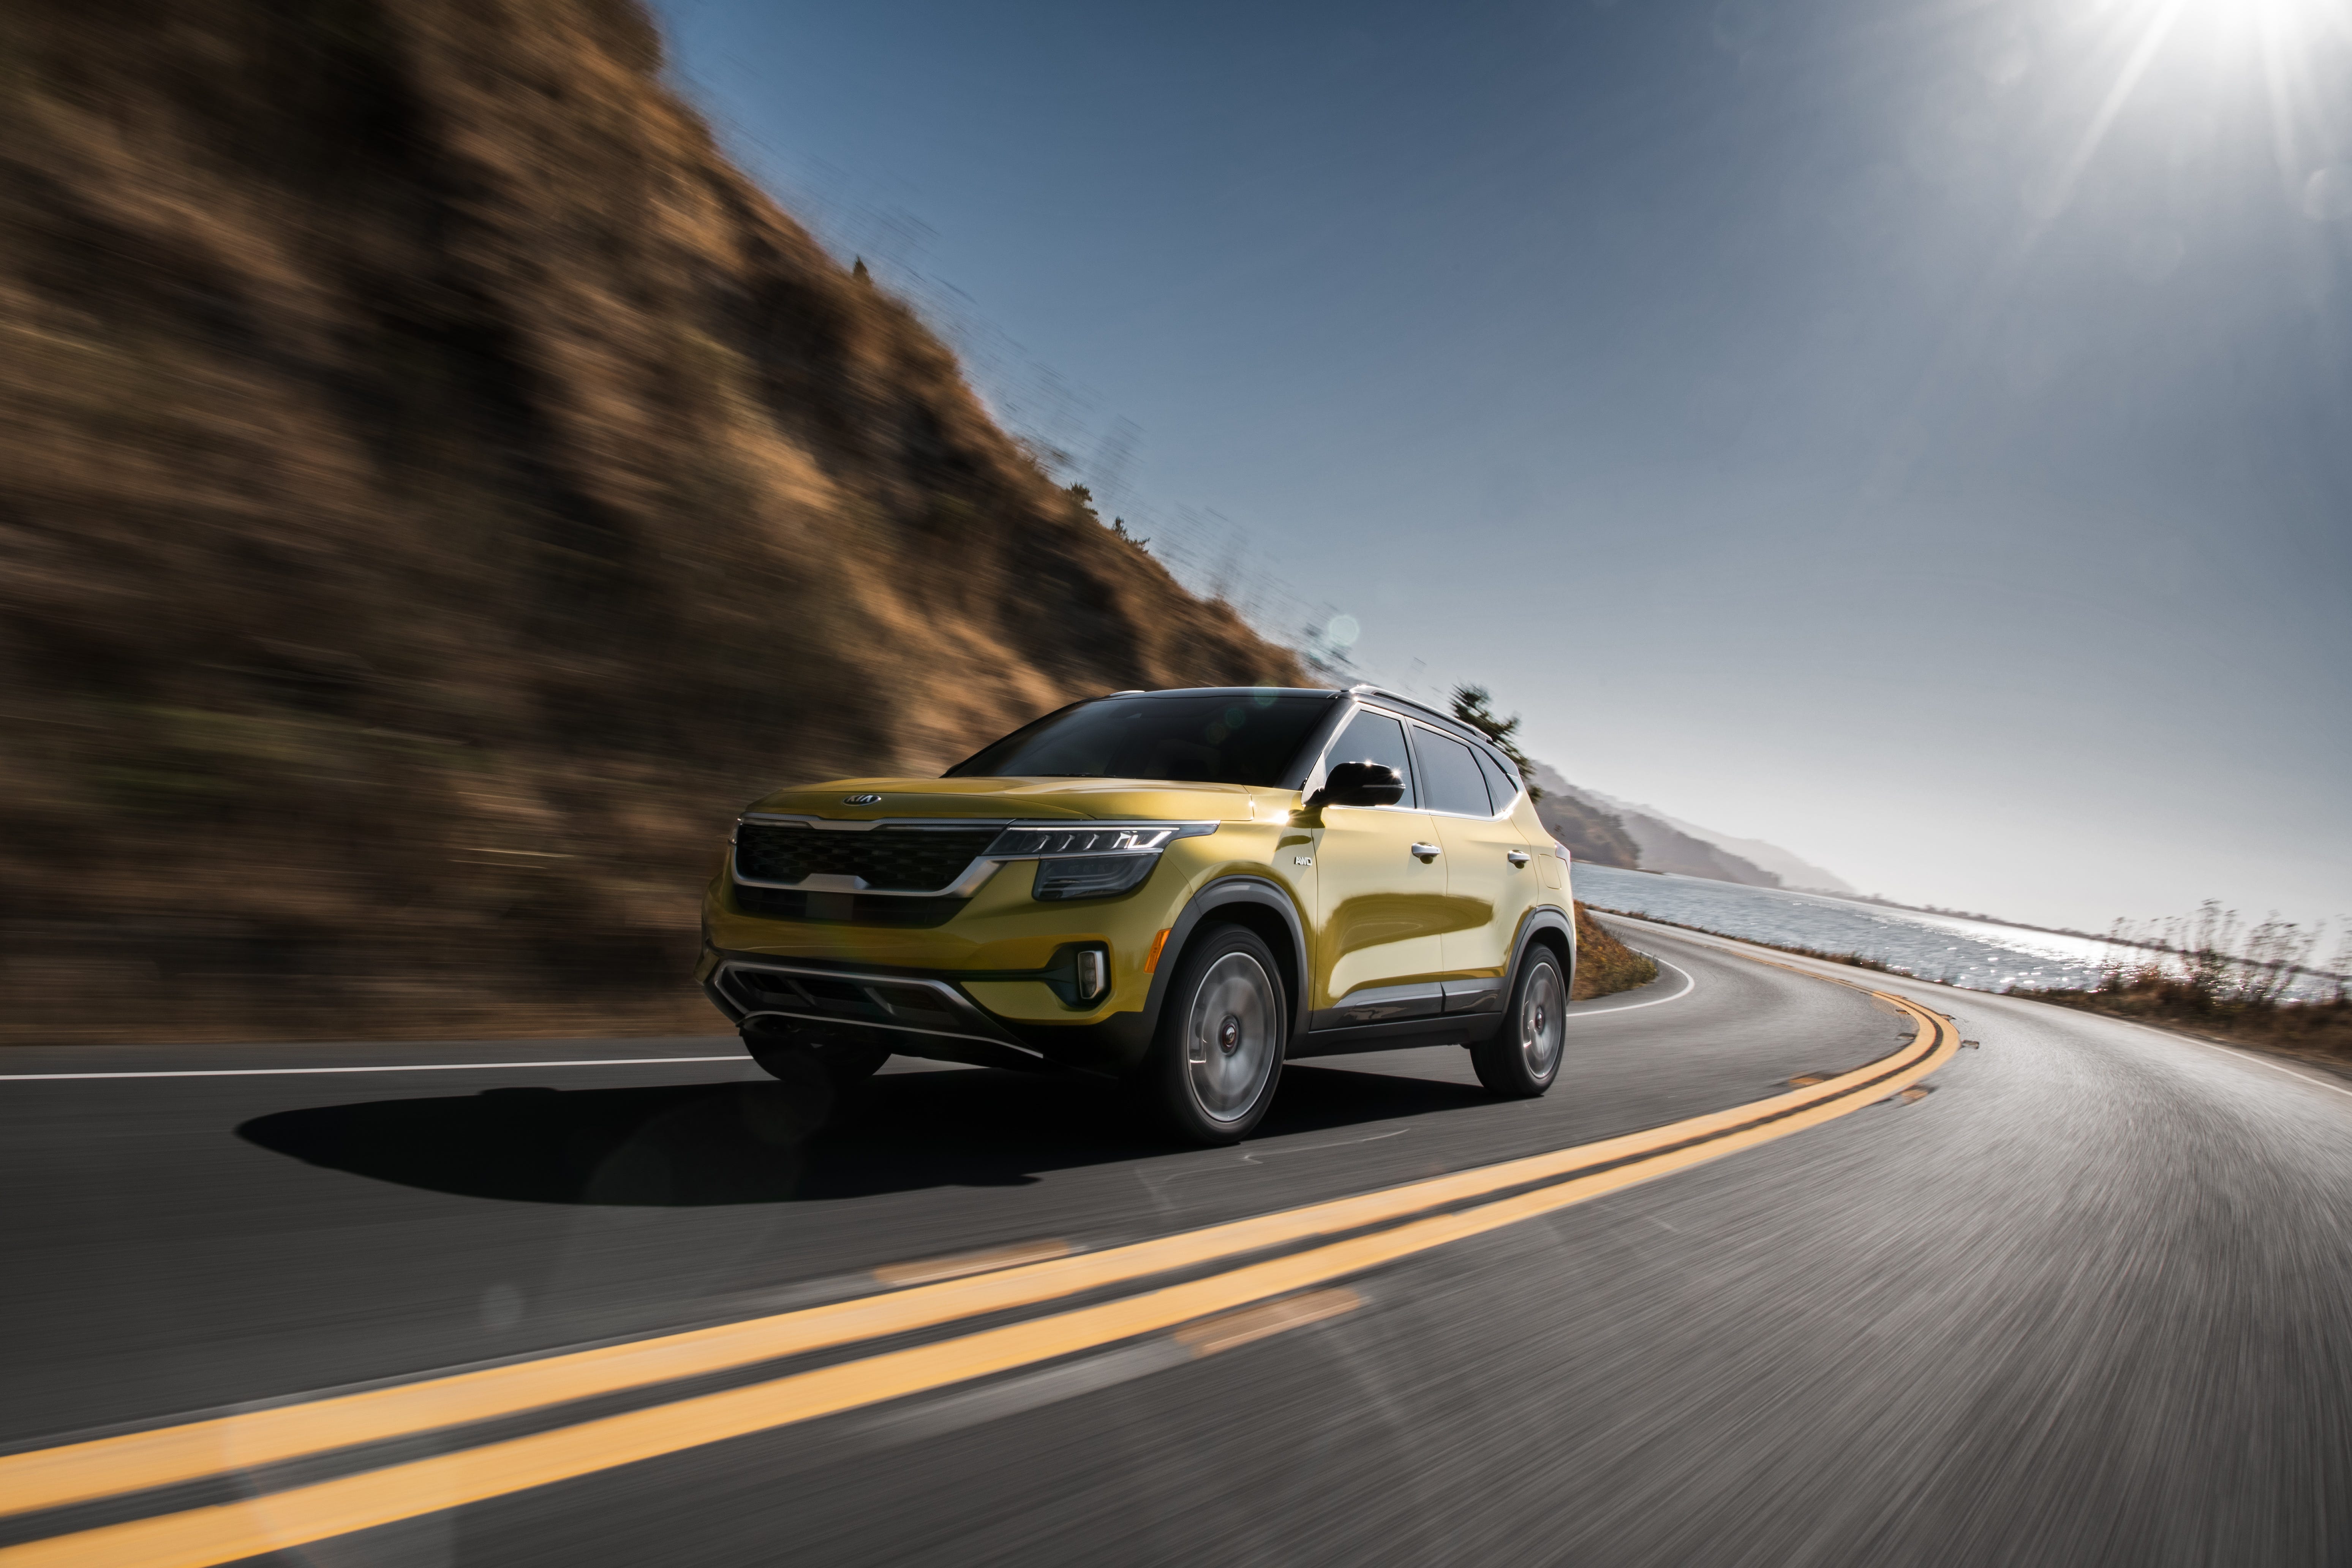 2021Kia Seltos small SUV builds on Telluride's looks and appeal